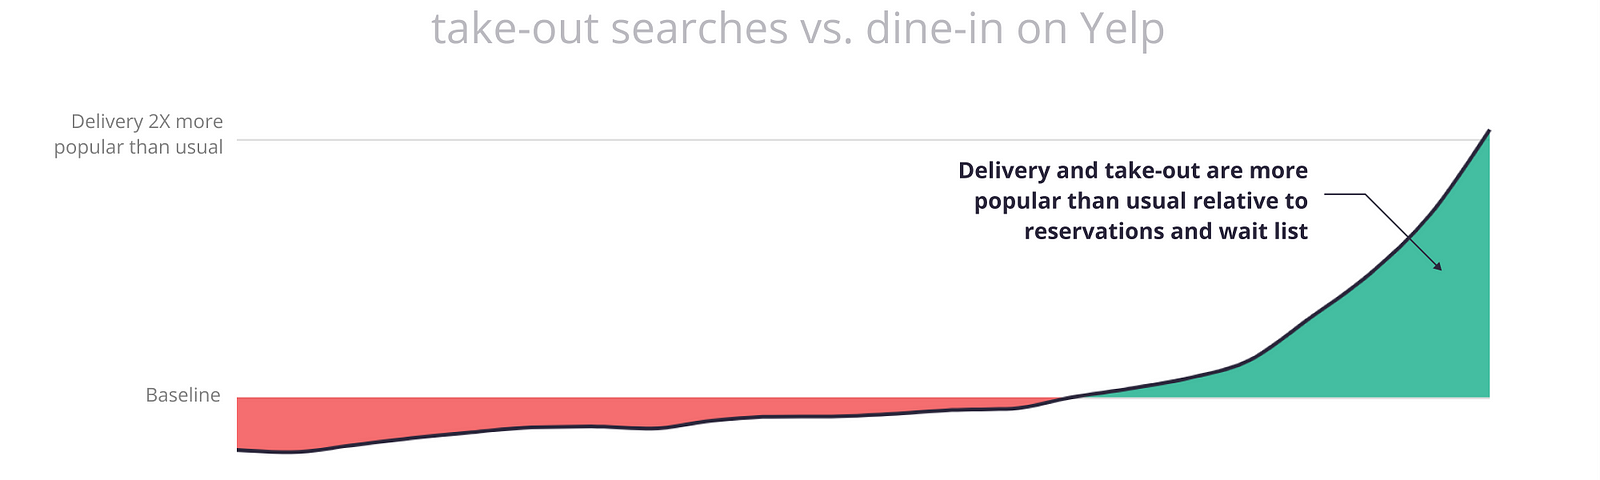 Delivery and Take-Out Are Replacing Dine-In